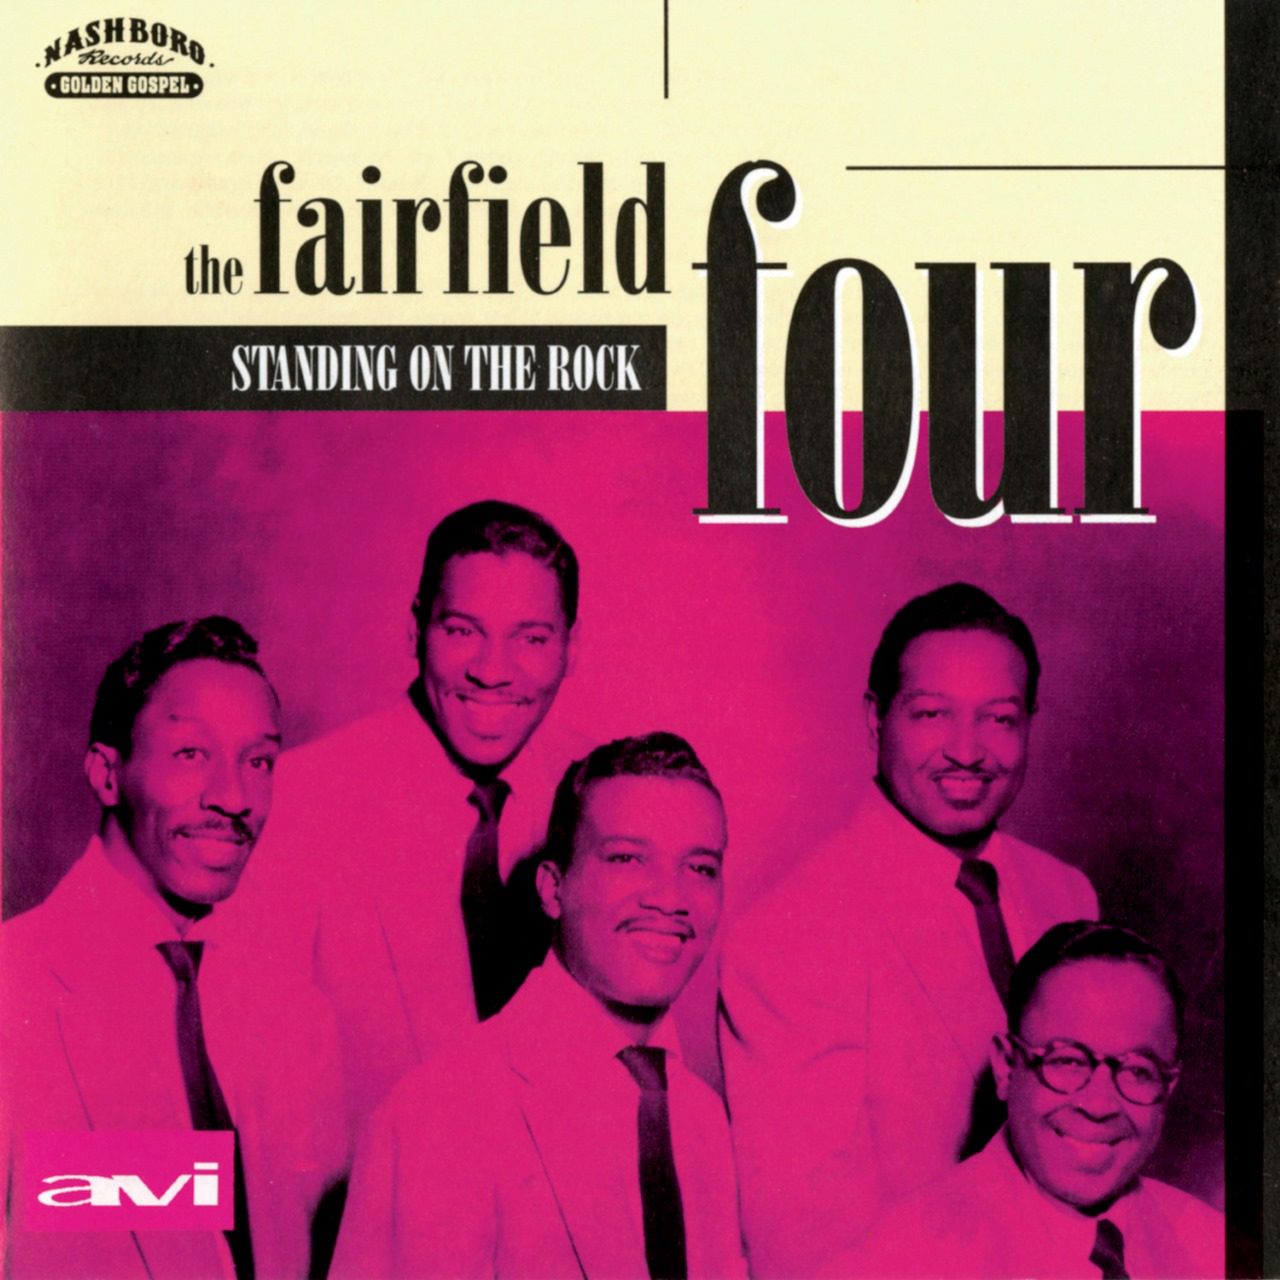 Fairfield Four – Standing On The Rock cover album